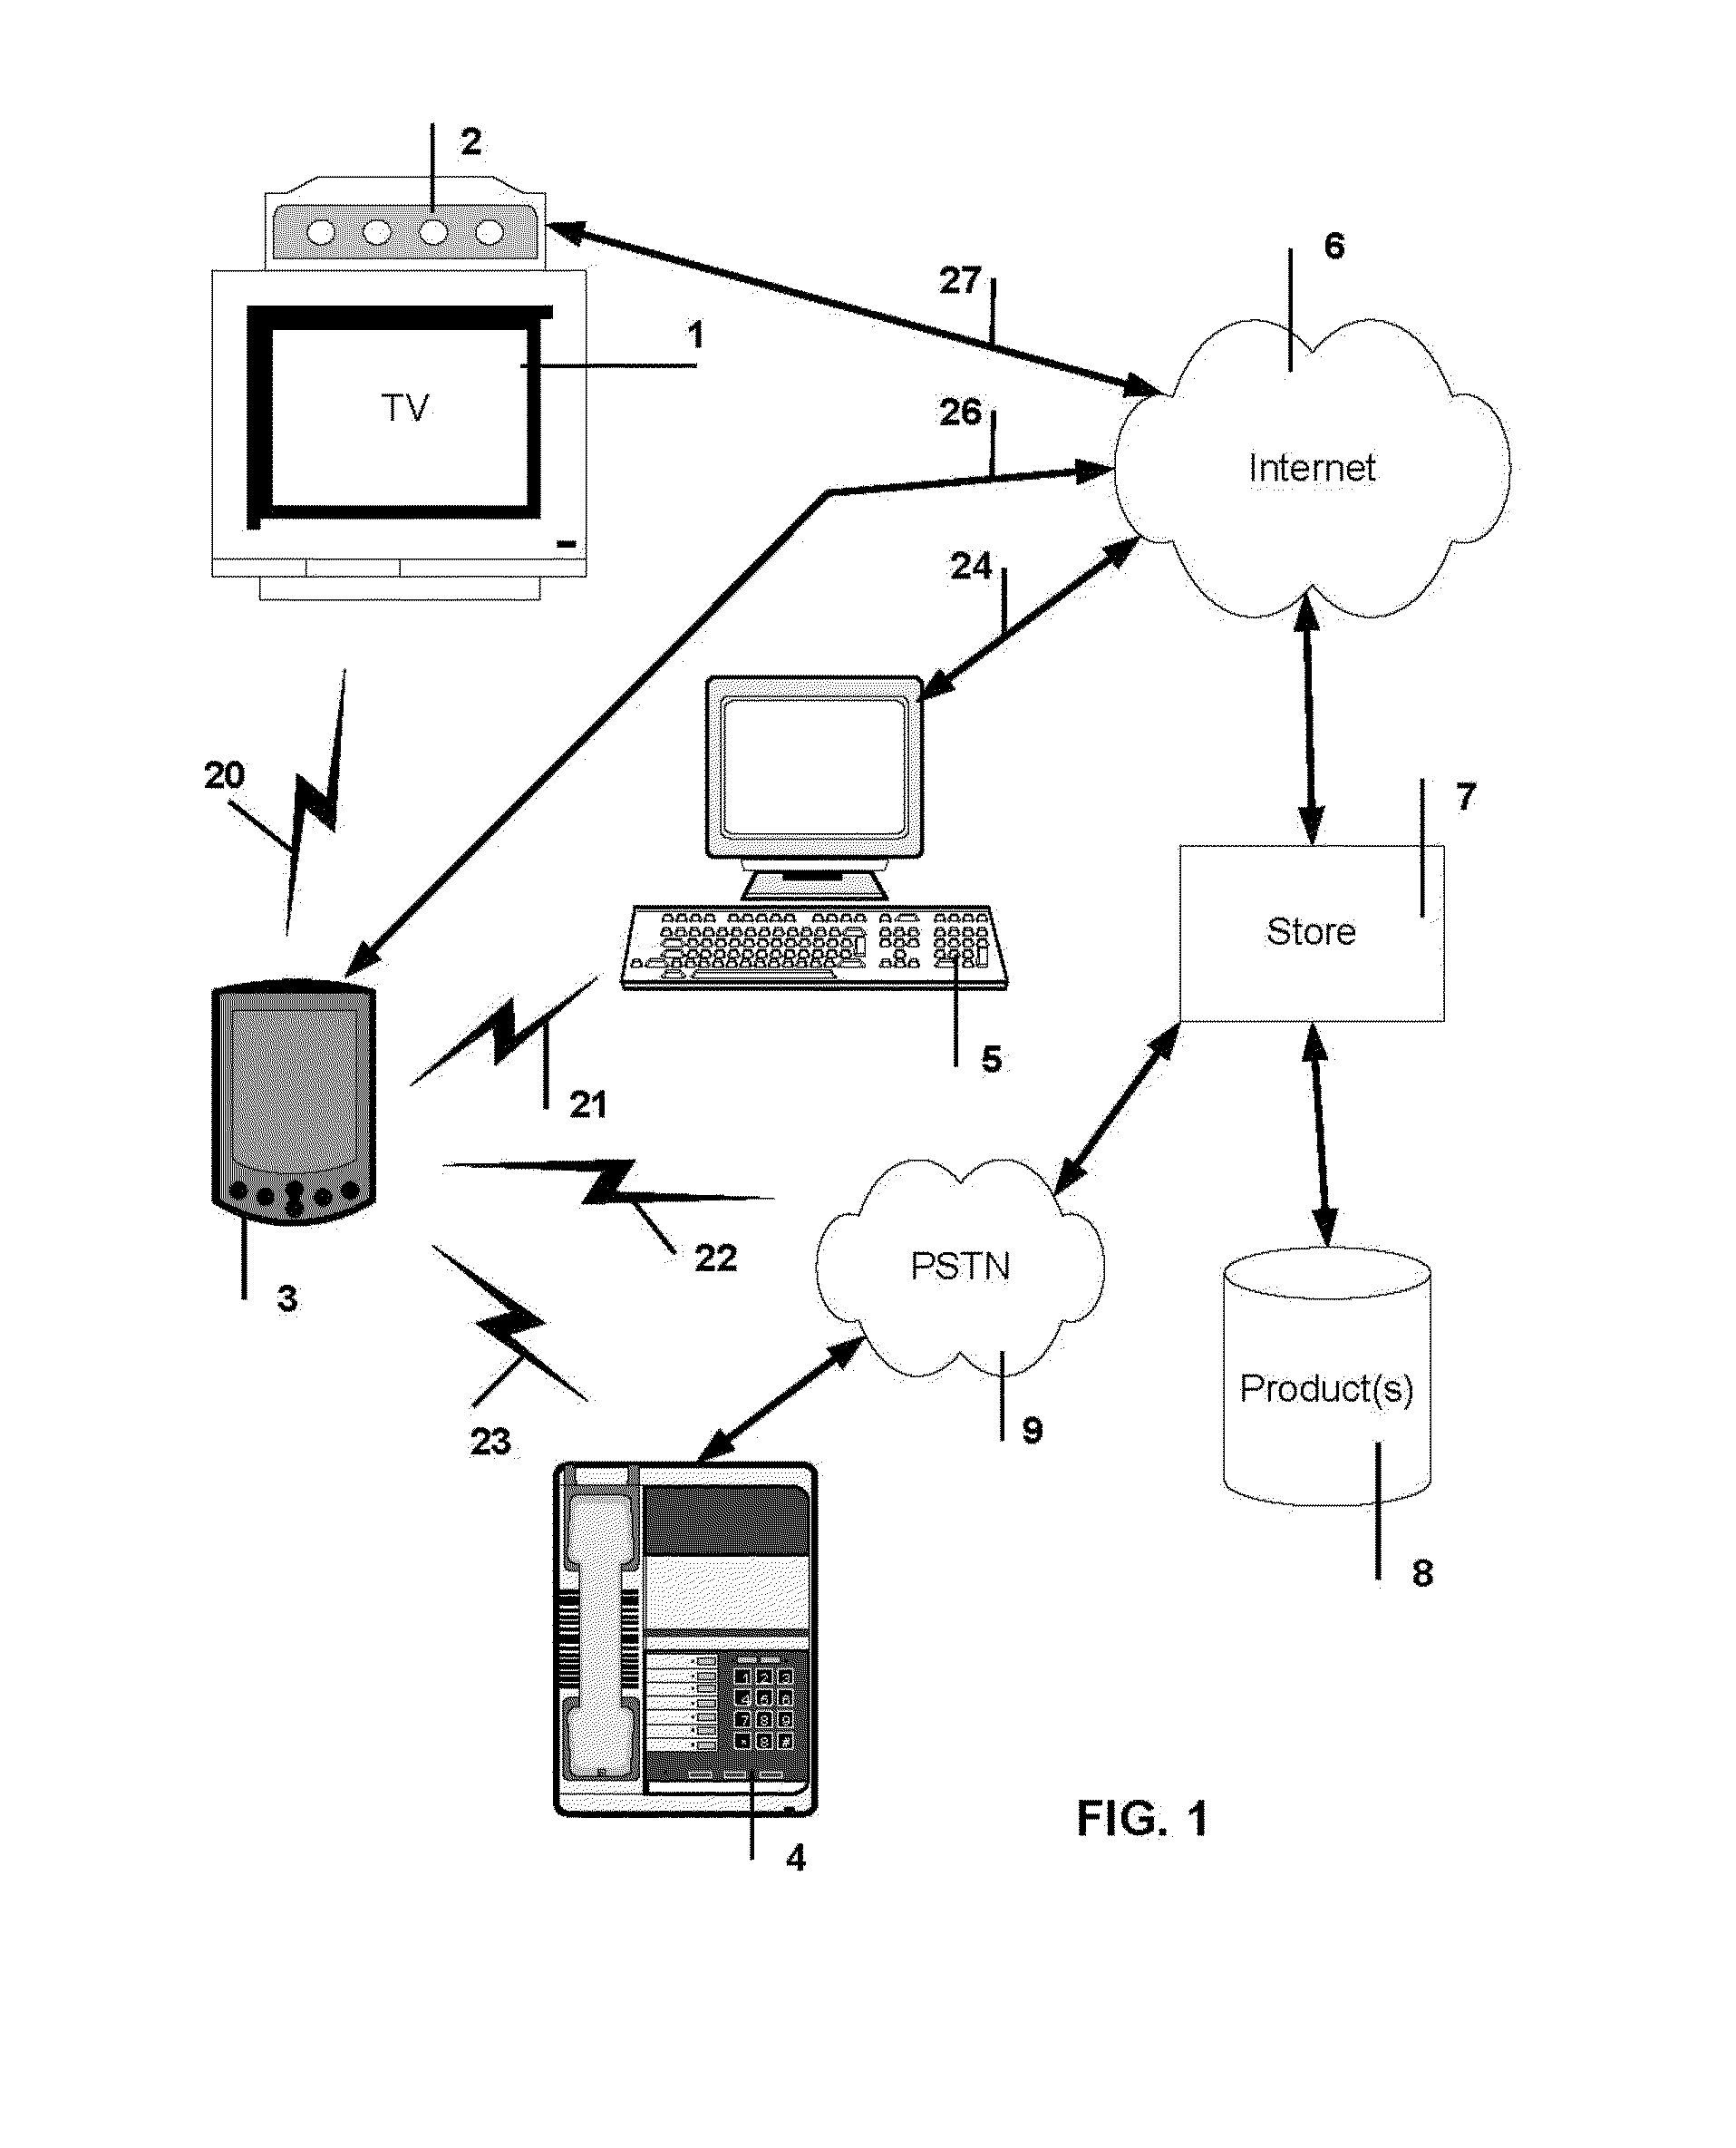 Television System To Extract Television Product Placement Advertisement Data And To Store Data In a Remote Control Device